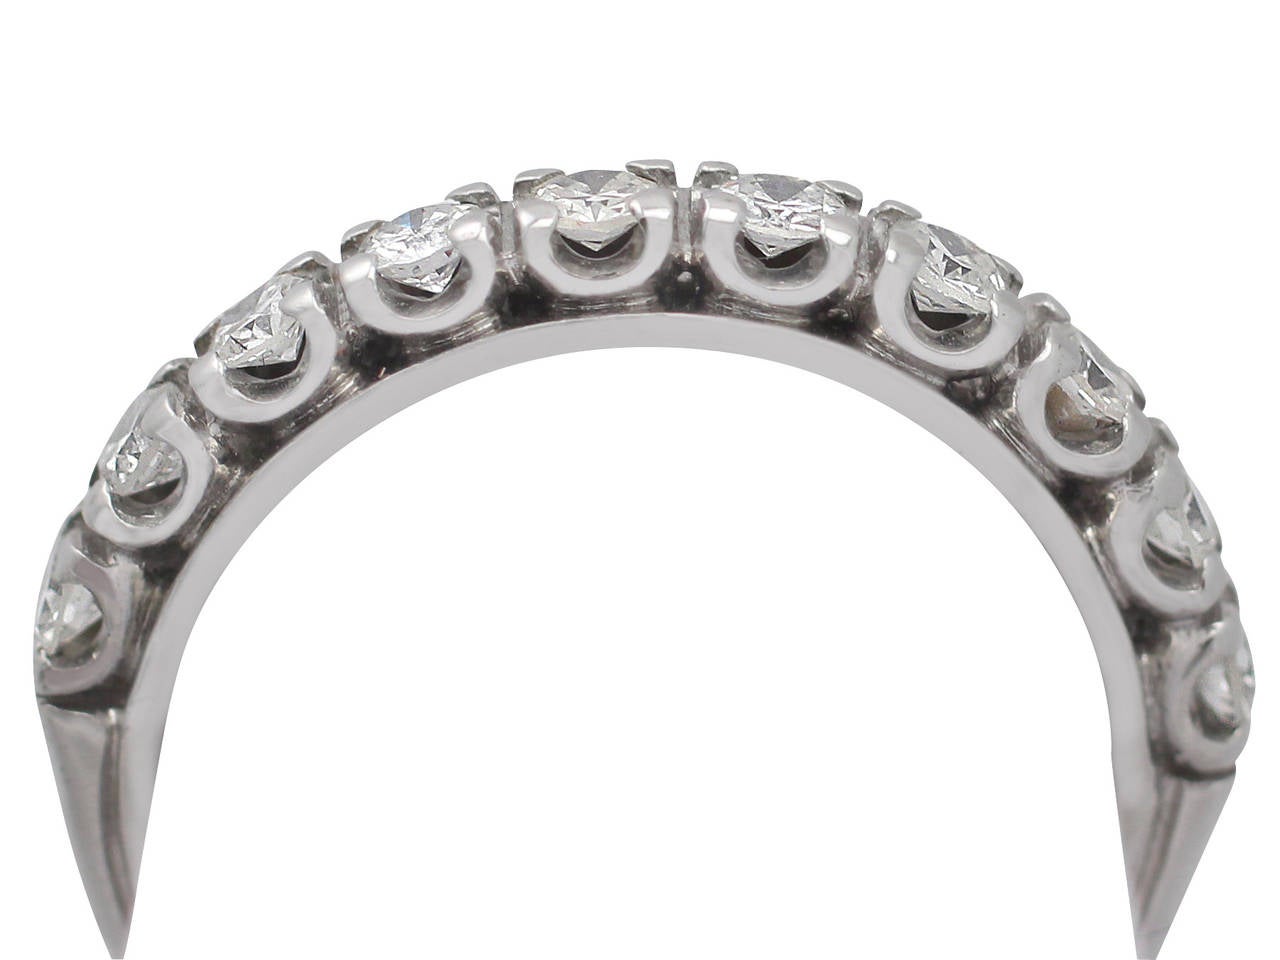 A very good vintage French 0.35 carat diamond and 18 karat white gold half eternity ring; part of the vintage jewelry/diamond jewelry collections

This vintage half eternity/multi-diamond ring has been crafted in 18k white gold.

The ring is claw /